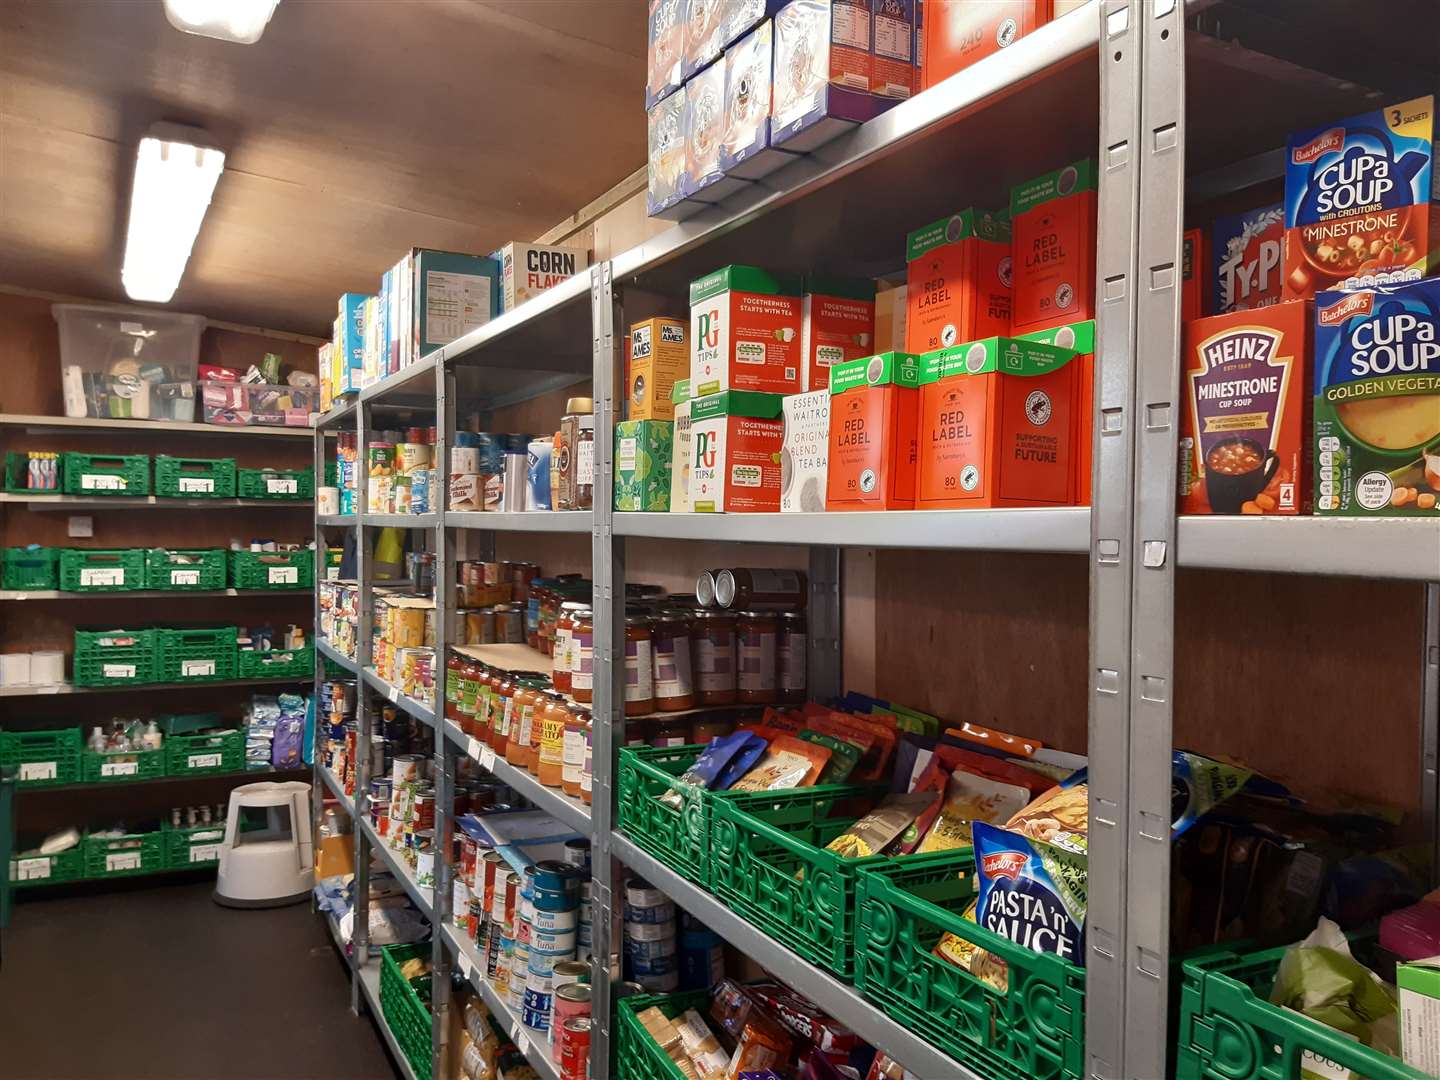 The team keeps the stockroom filled with food and essential items